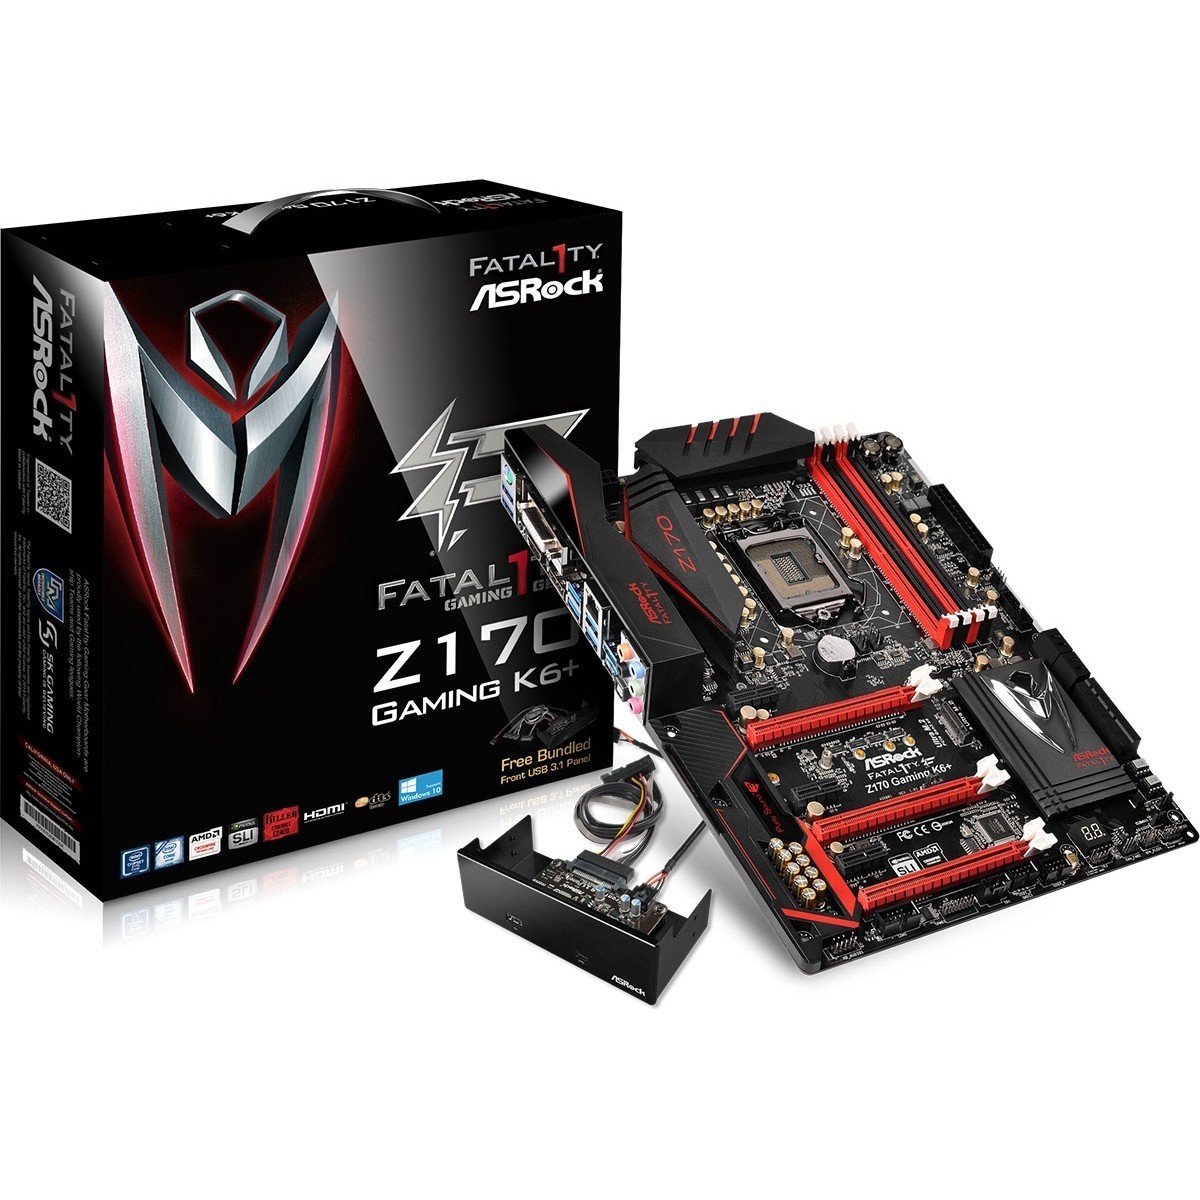 ASROCK fatal1ty z170 Gaming k6. ASROCK z790 PG Lightning. ASROCK Fatality z170 Gaming k4 вблизи. Материнская плата Fatality Gaming Gear professional Series.